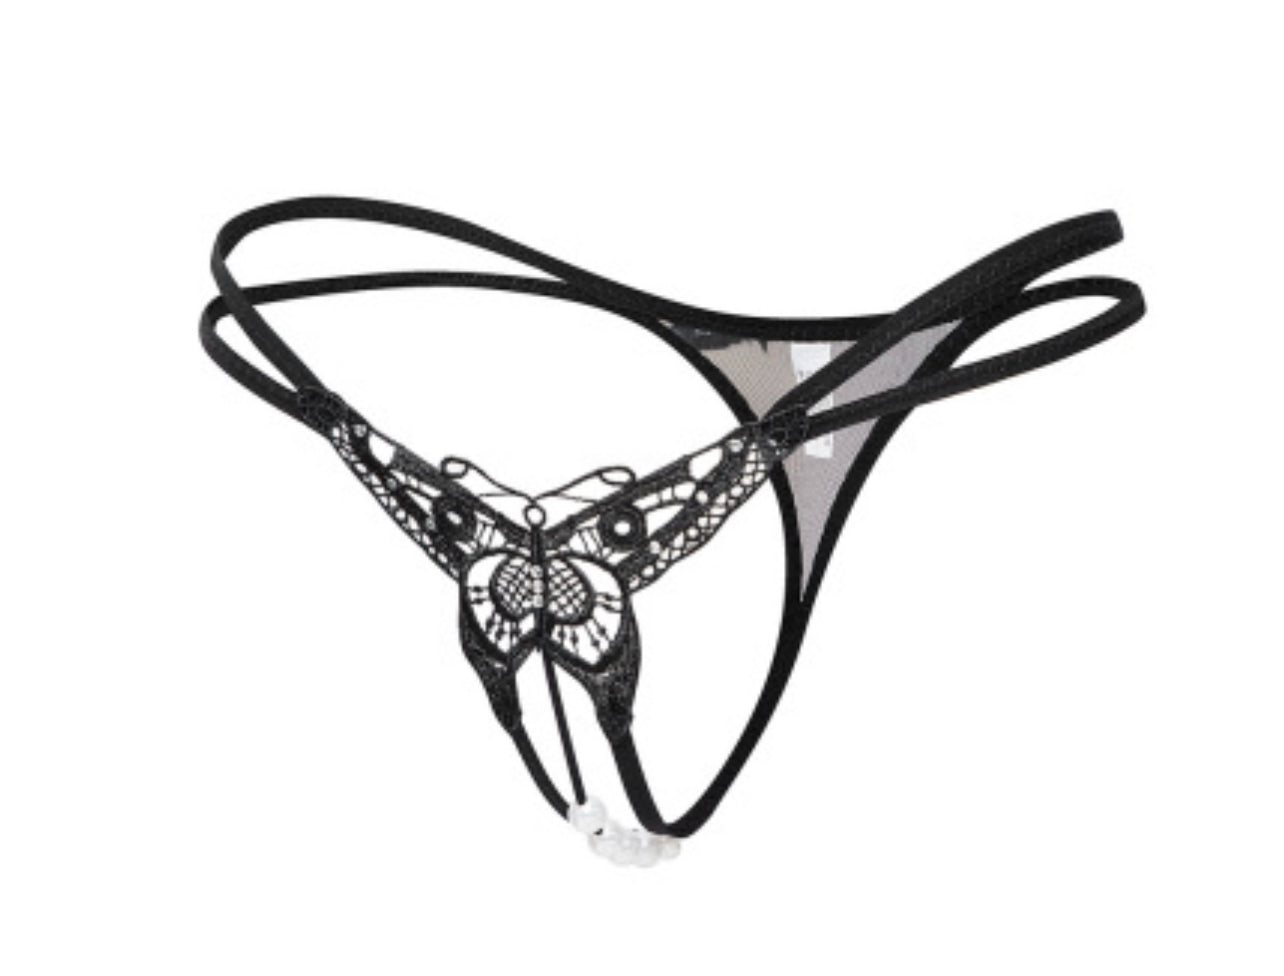 Pearl Chain Open Crotch G-string, crotchless panties, crotchless panties for women, pearl panties, open crotch panties for women